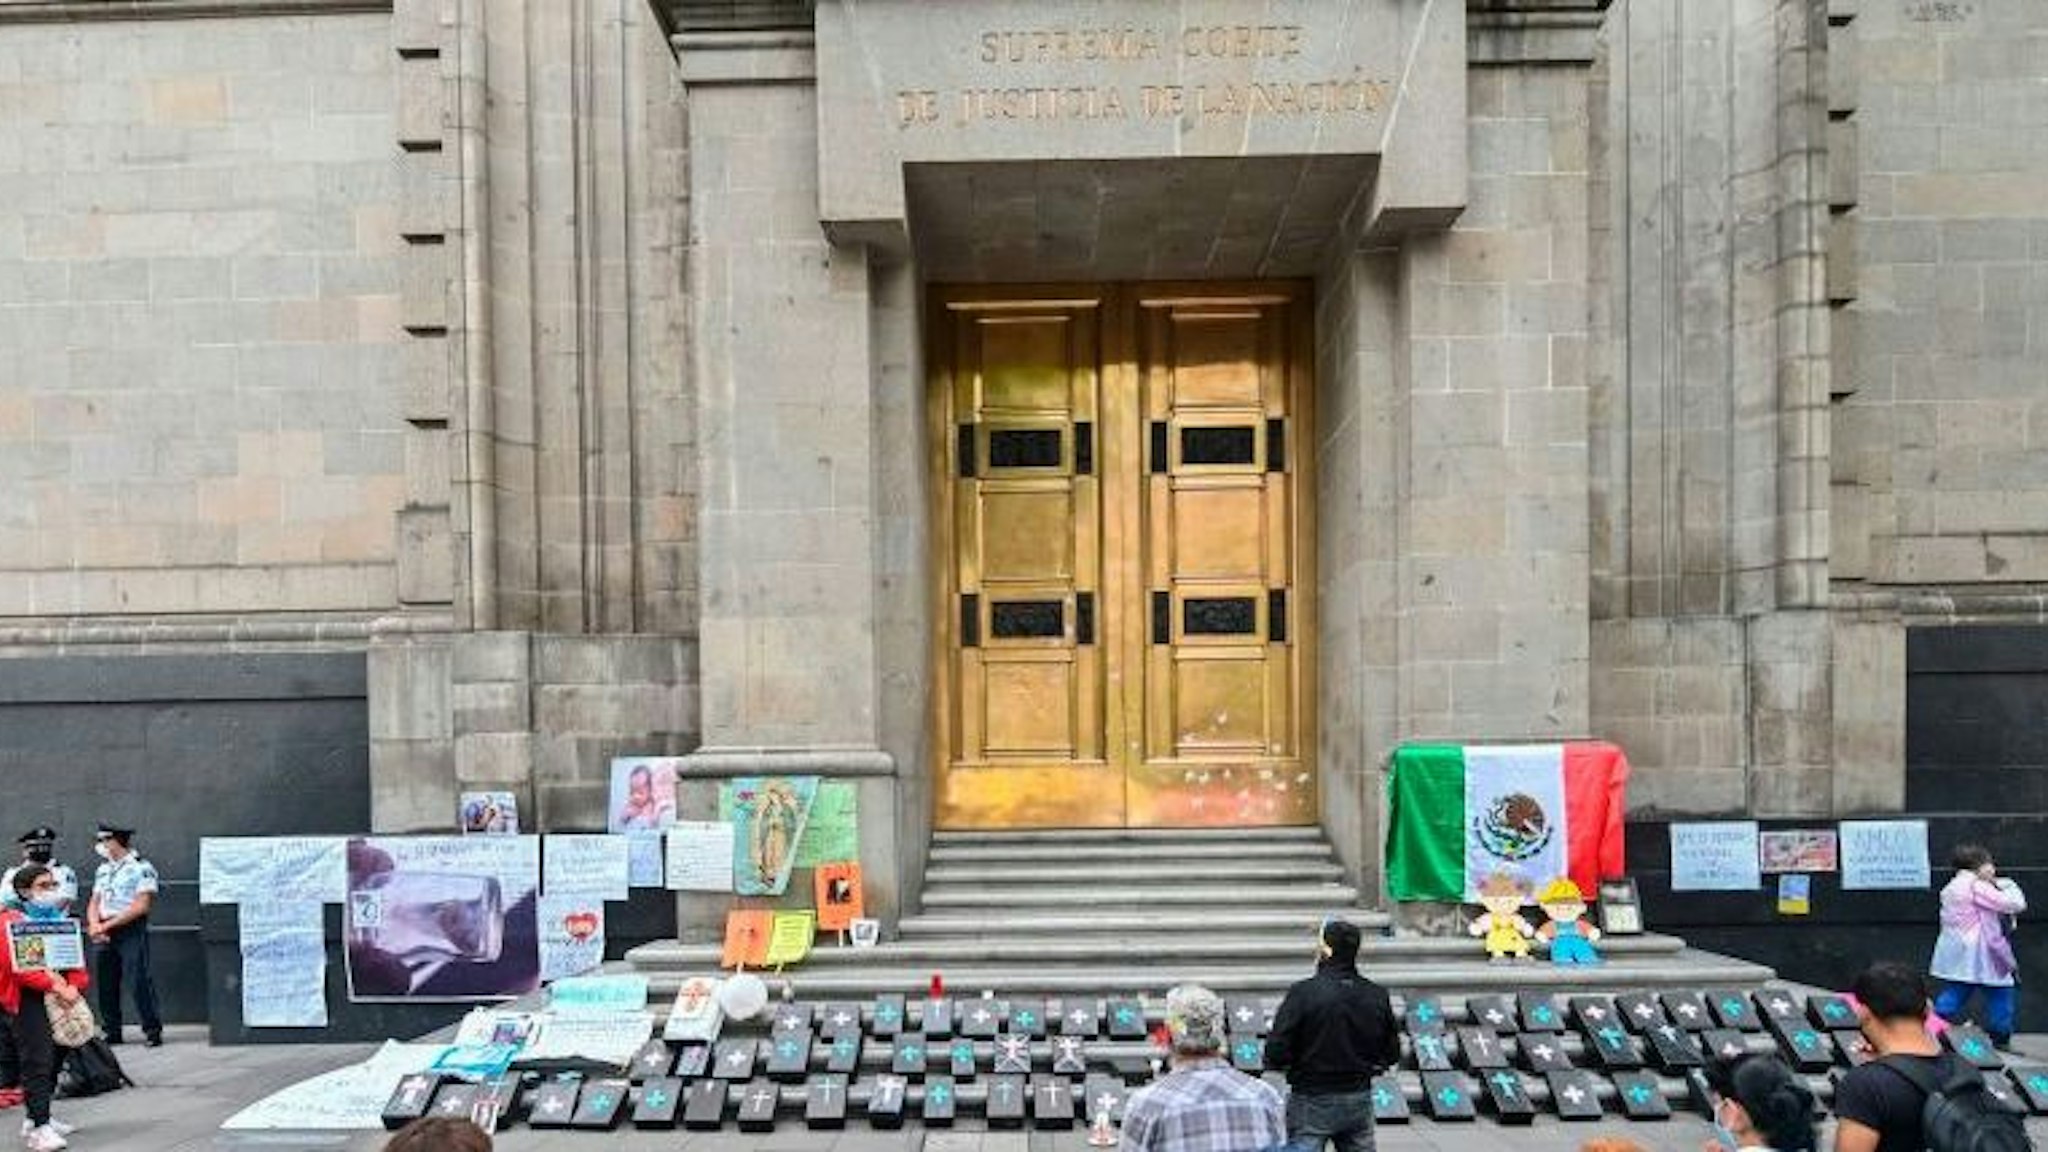 Catholic anti-abortion activists pray during a protest outside the Mexican Supreme Court building in Mexico City, on July 29, 2020, amid the novel coronavirus pandemic. - The supreme court will debate on Wednesday a proposal that could lead to decriminalisation the abortion across the country.